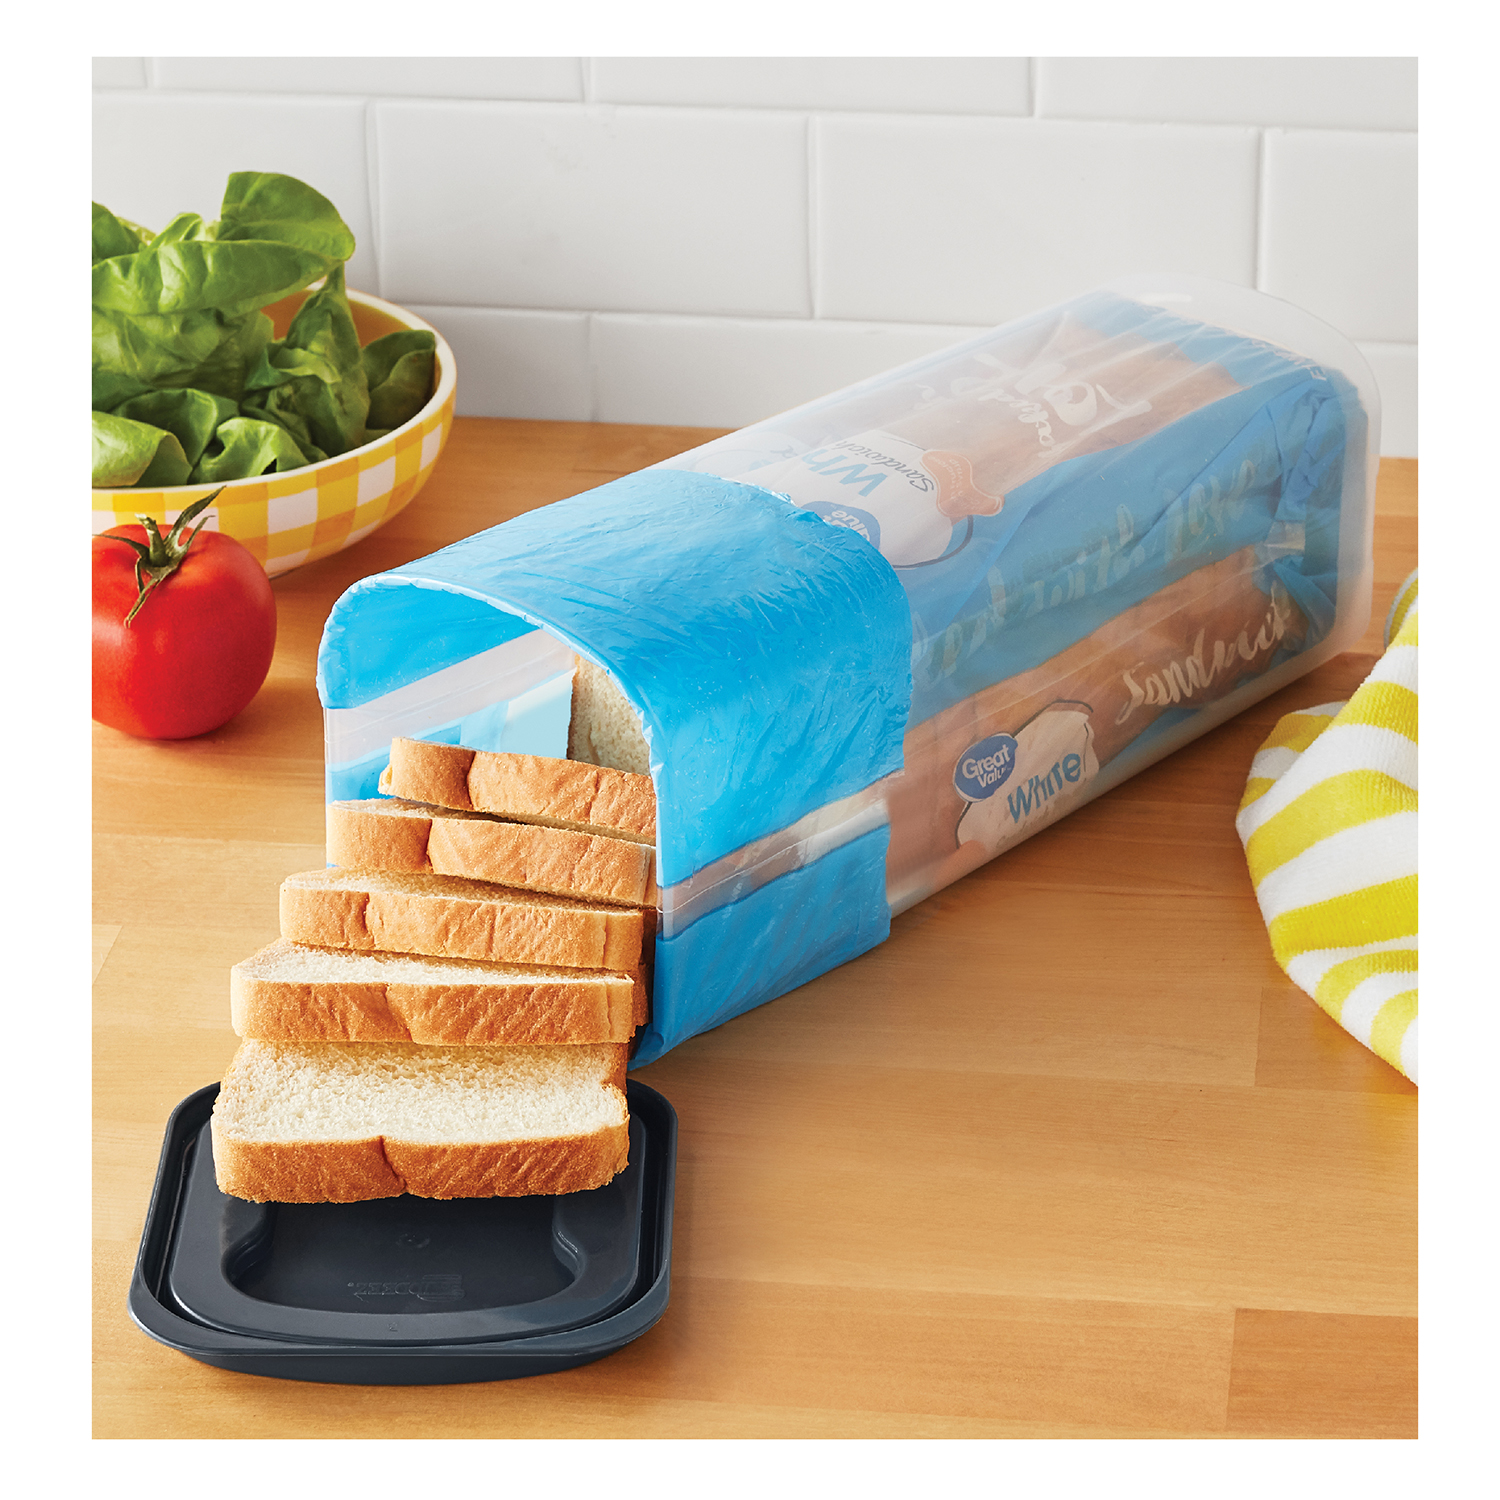 Mainstays Bread Plastic Storage Keeper, Clear with Gray Lid (1 Each) 5.25" x 5.25" x 13.62" - image 3 of 6